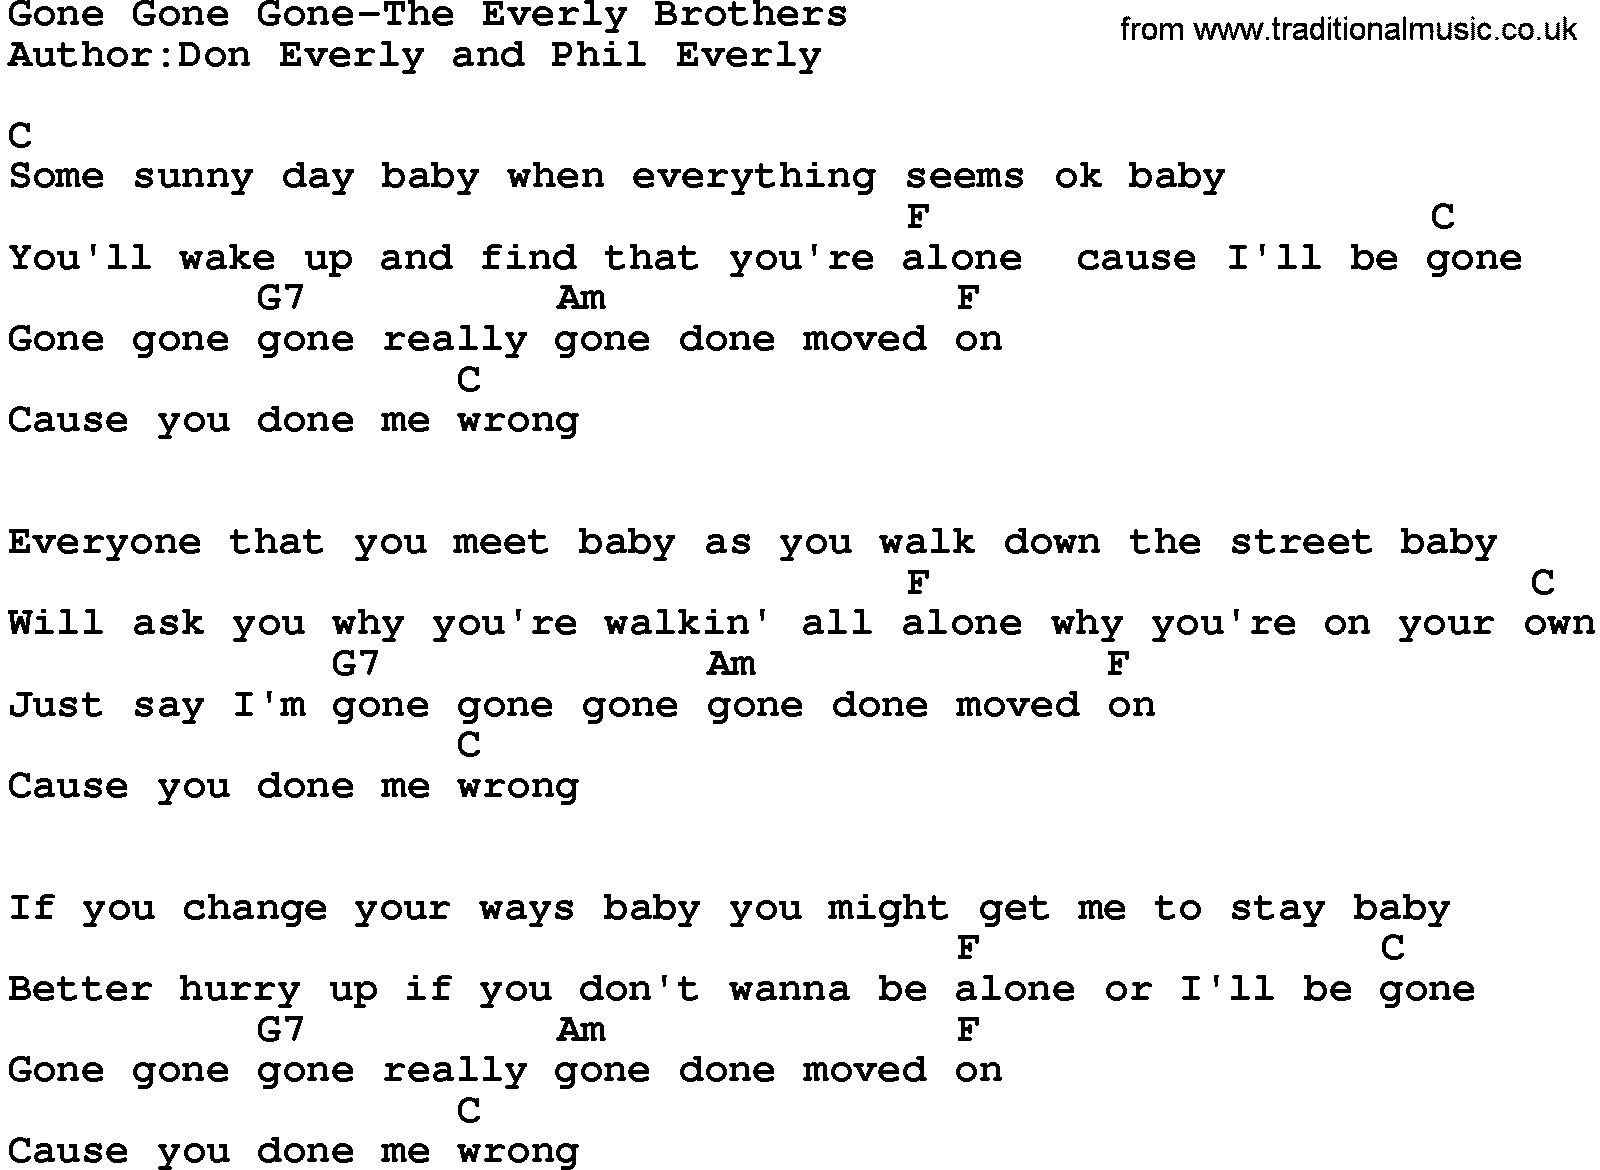 Country music song: Gone Gone Gone-The Everly Brothers lyrics and chords